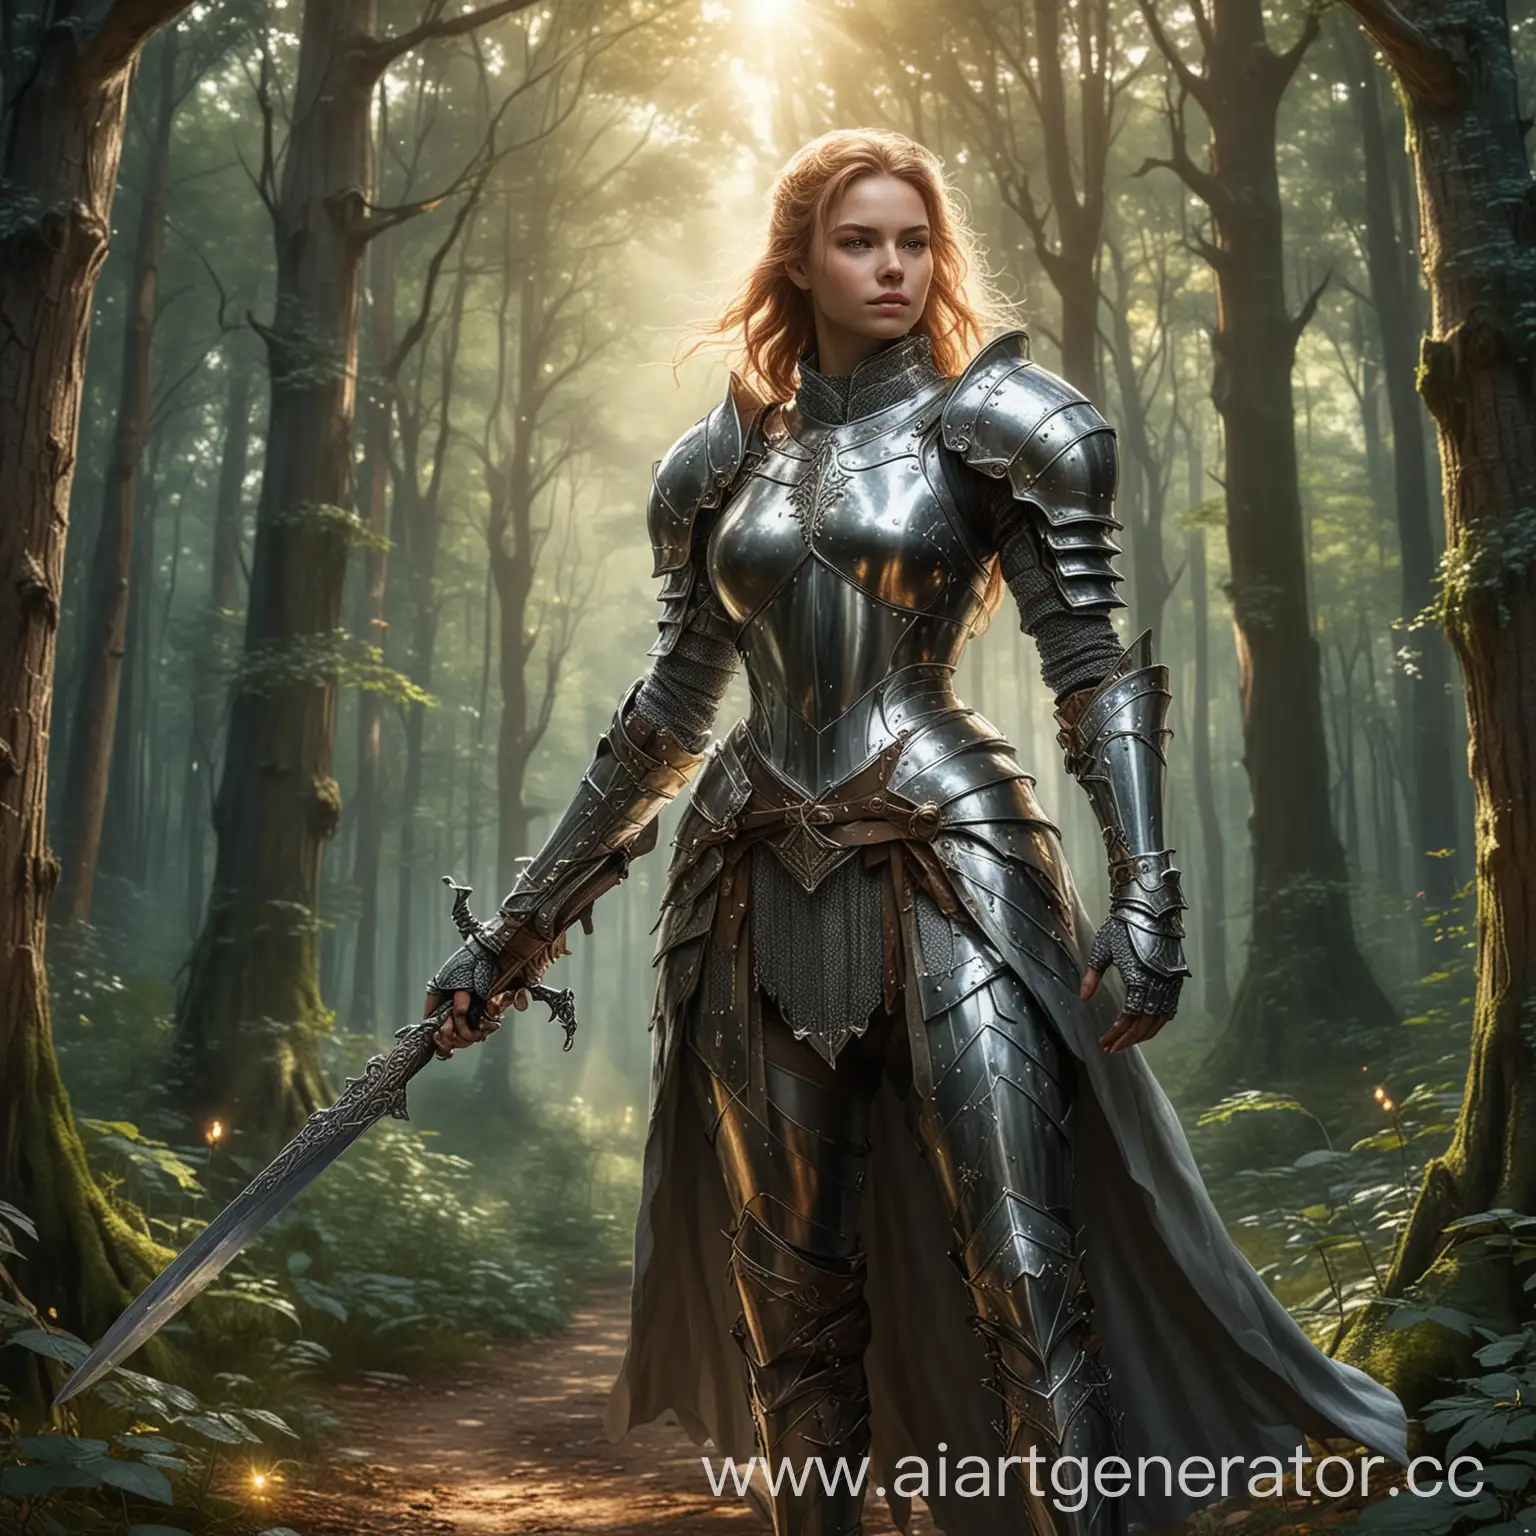 Knight-Lady-in-Metallic-Armor-Holding-Sword-in-Enchanted-Forest